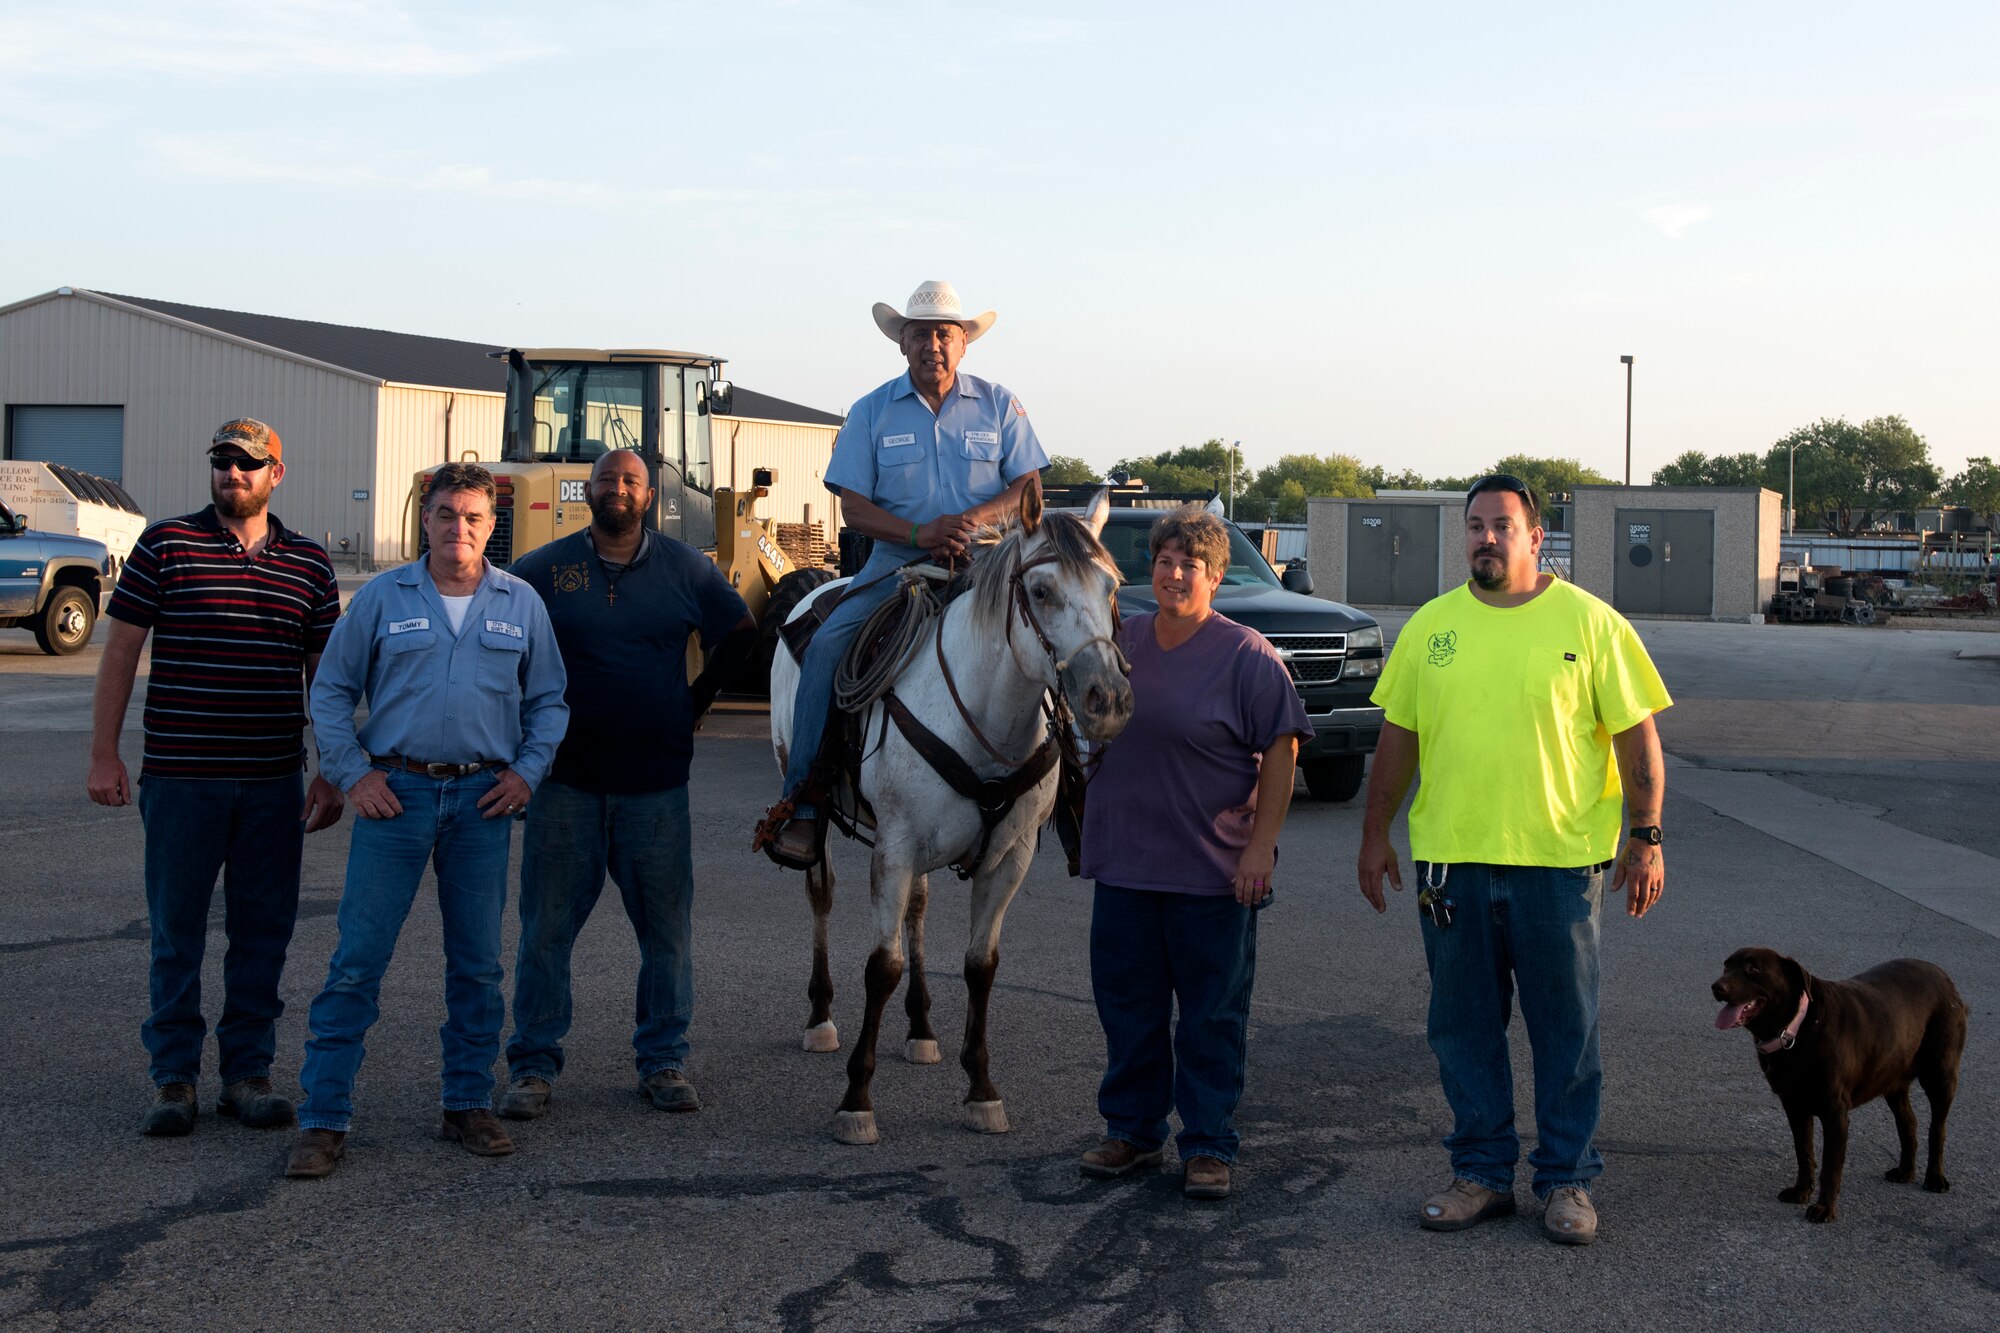 17th Civil Engineer Squadron heavy equipment operator, George Nava poses with other heavy equipment operators, called the dirt boys, at Goodfellow Air Force Base, Texas, June 29, 2018. Nava began his last day, before retirement, by checking off an item on his bucket list, riding to work on his horse. (U.S. Air Force photo by Airman 1st Class Zachary Chapman/Released)